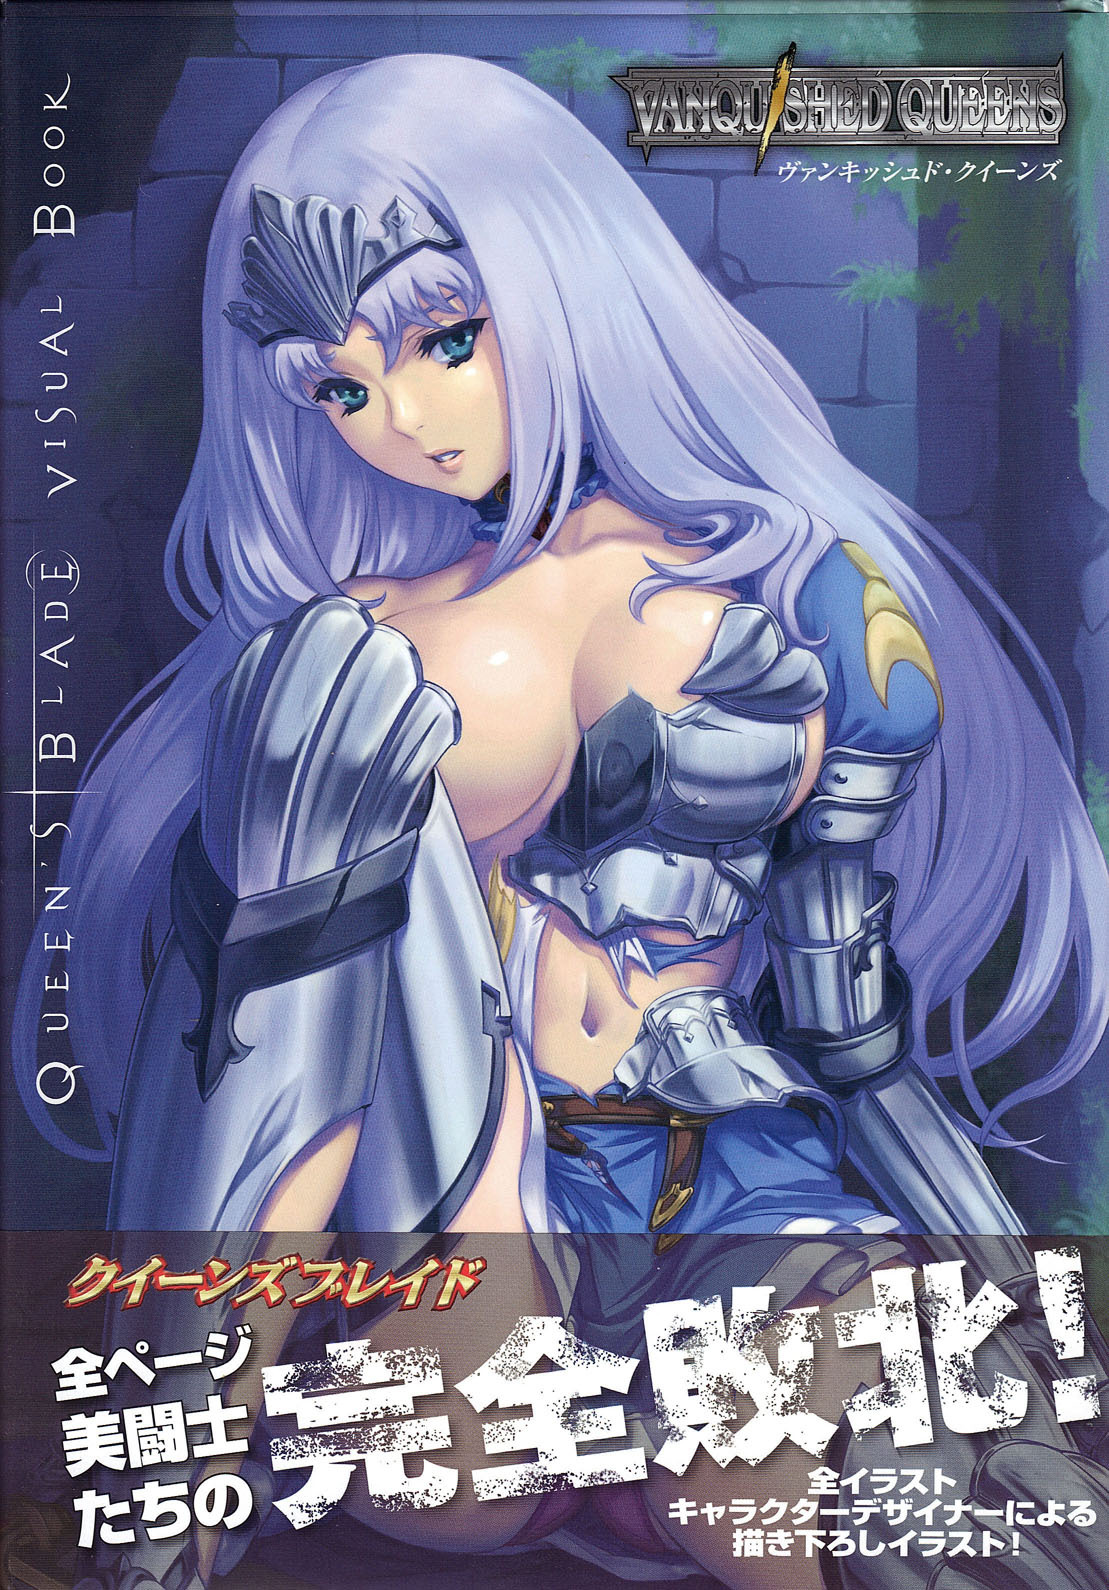 [Various] Vanquished Queens Visual Book (Queen's Blade) [English] [leecherboy] page 1 full